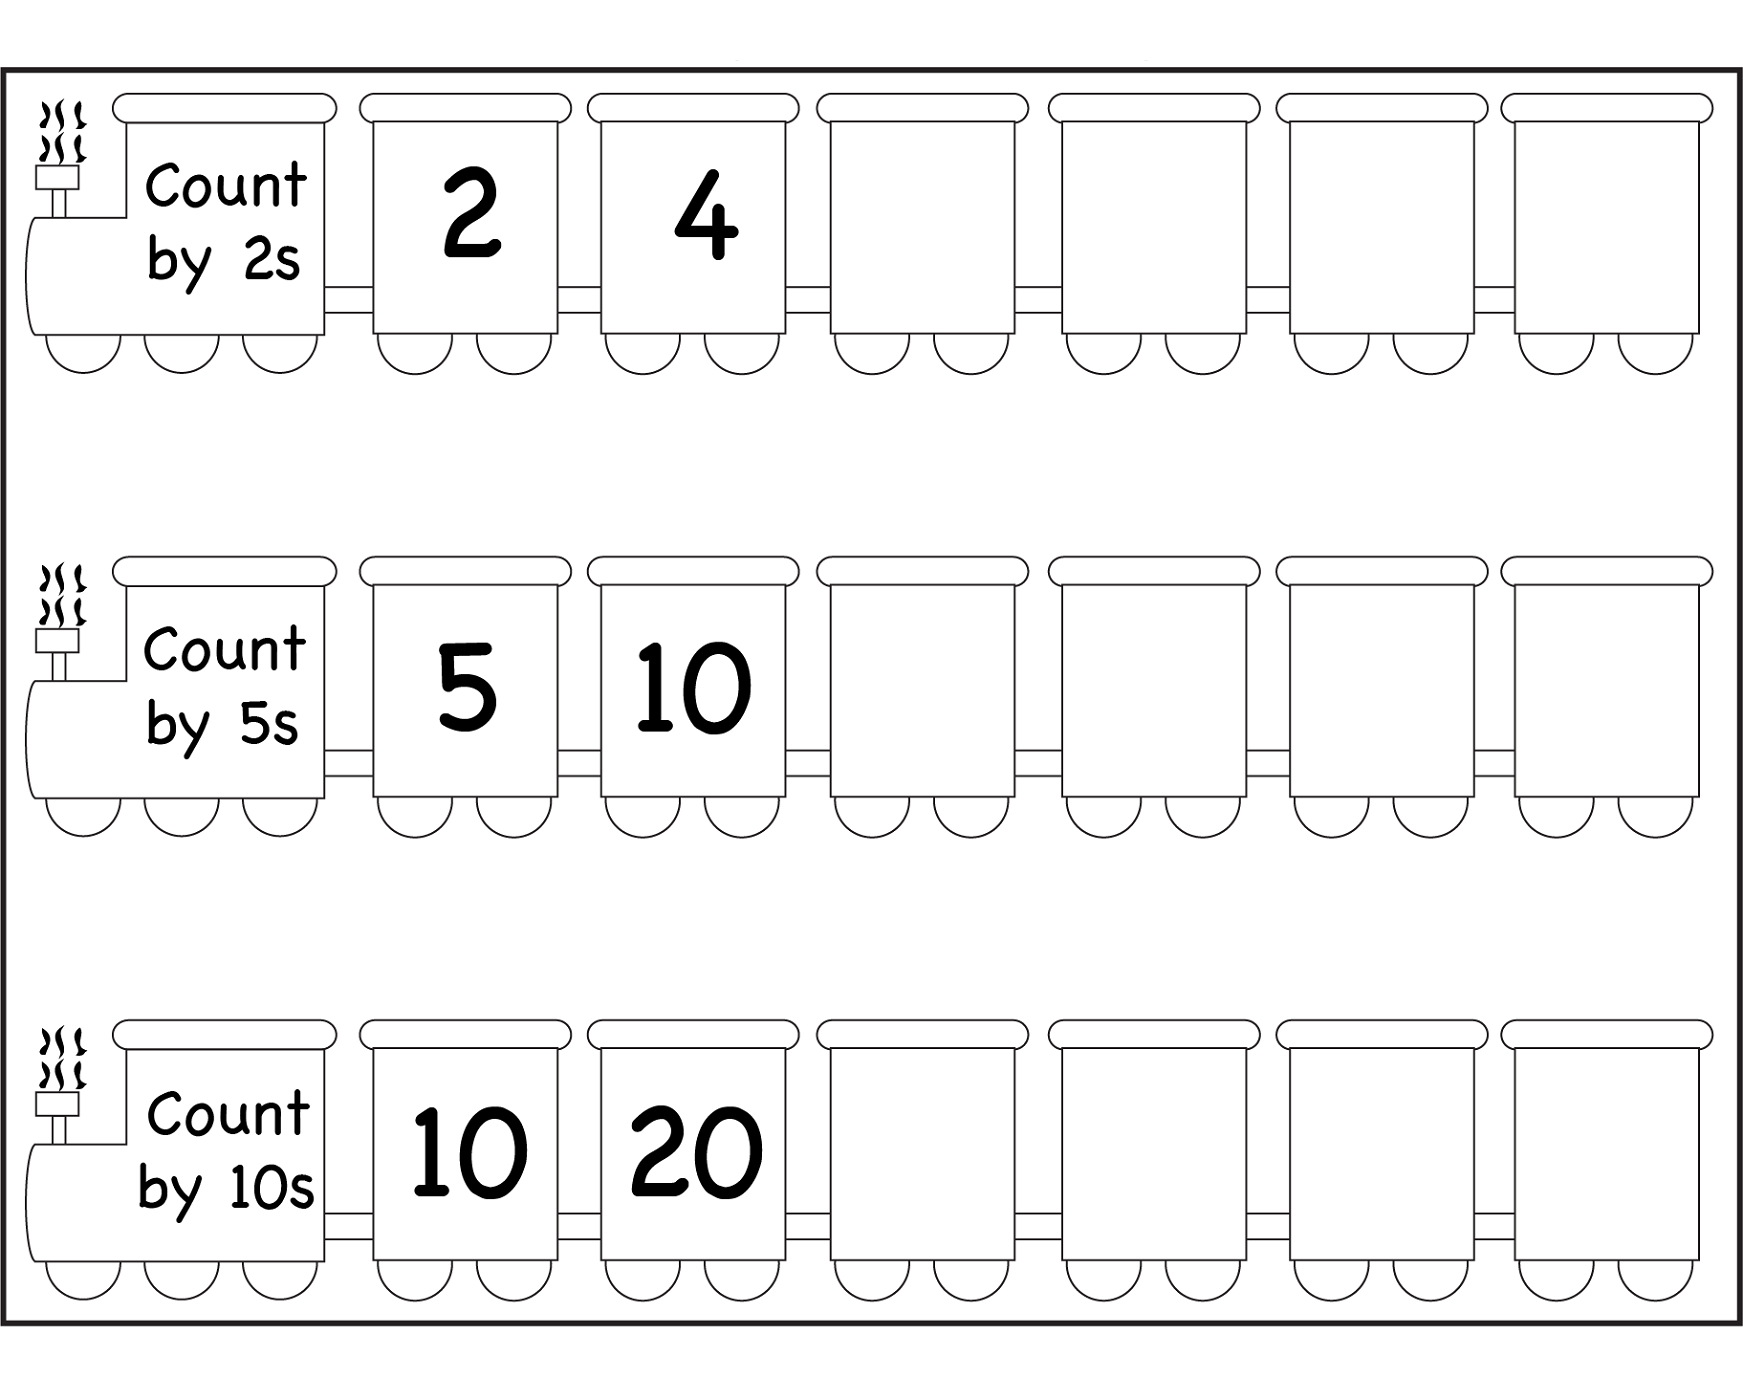 count by 2s worksheet for kids